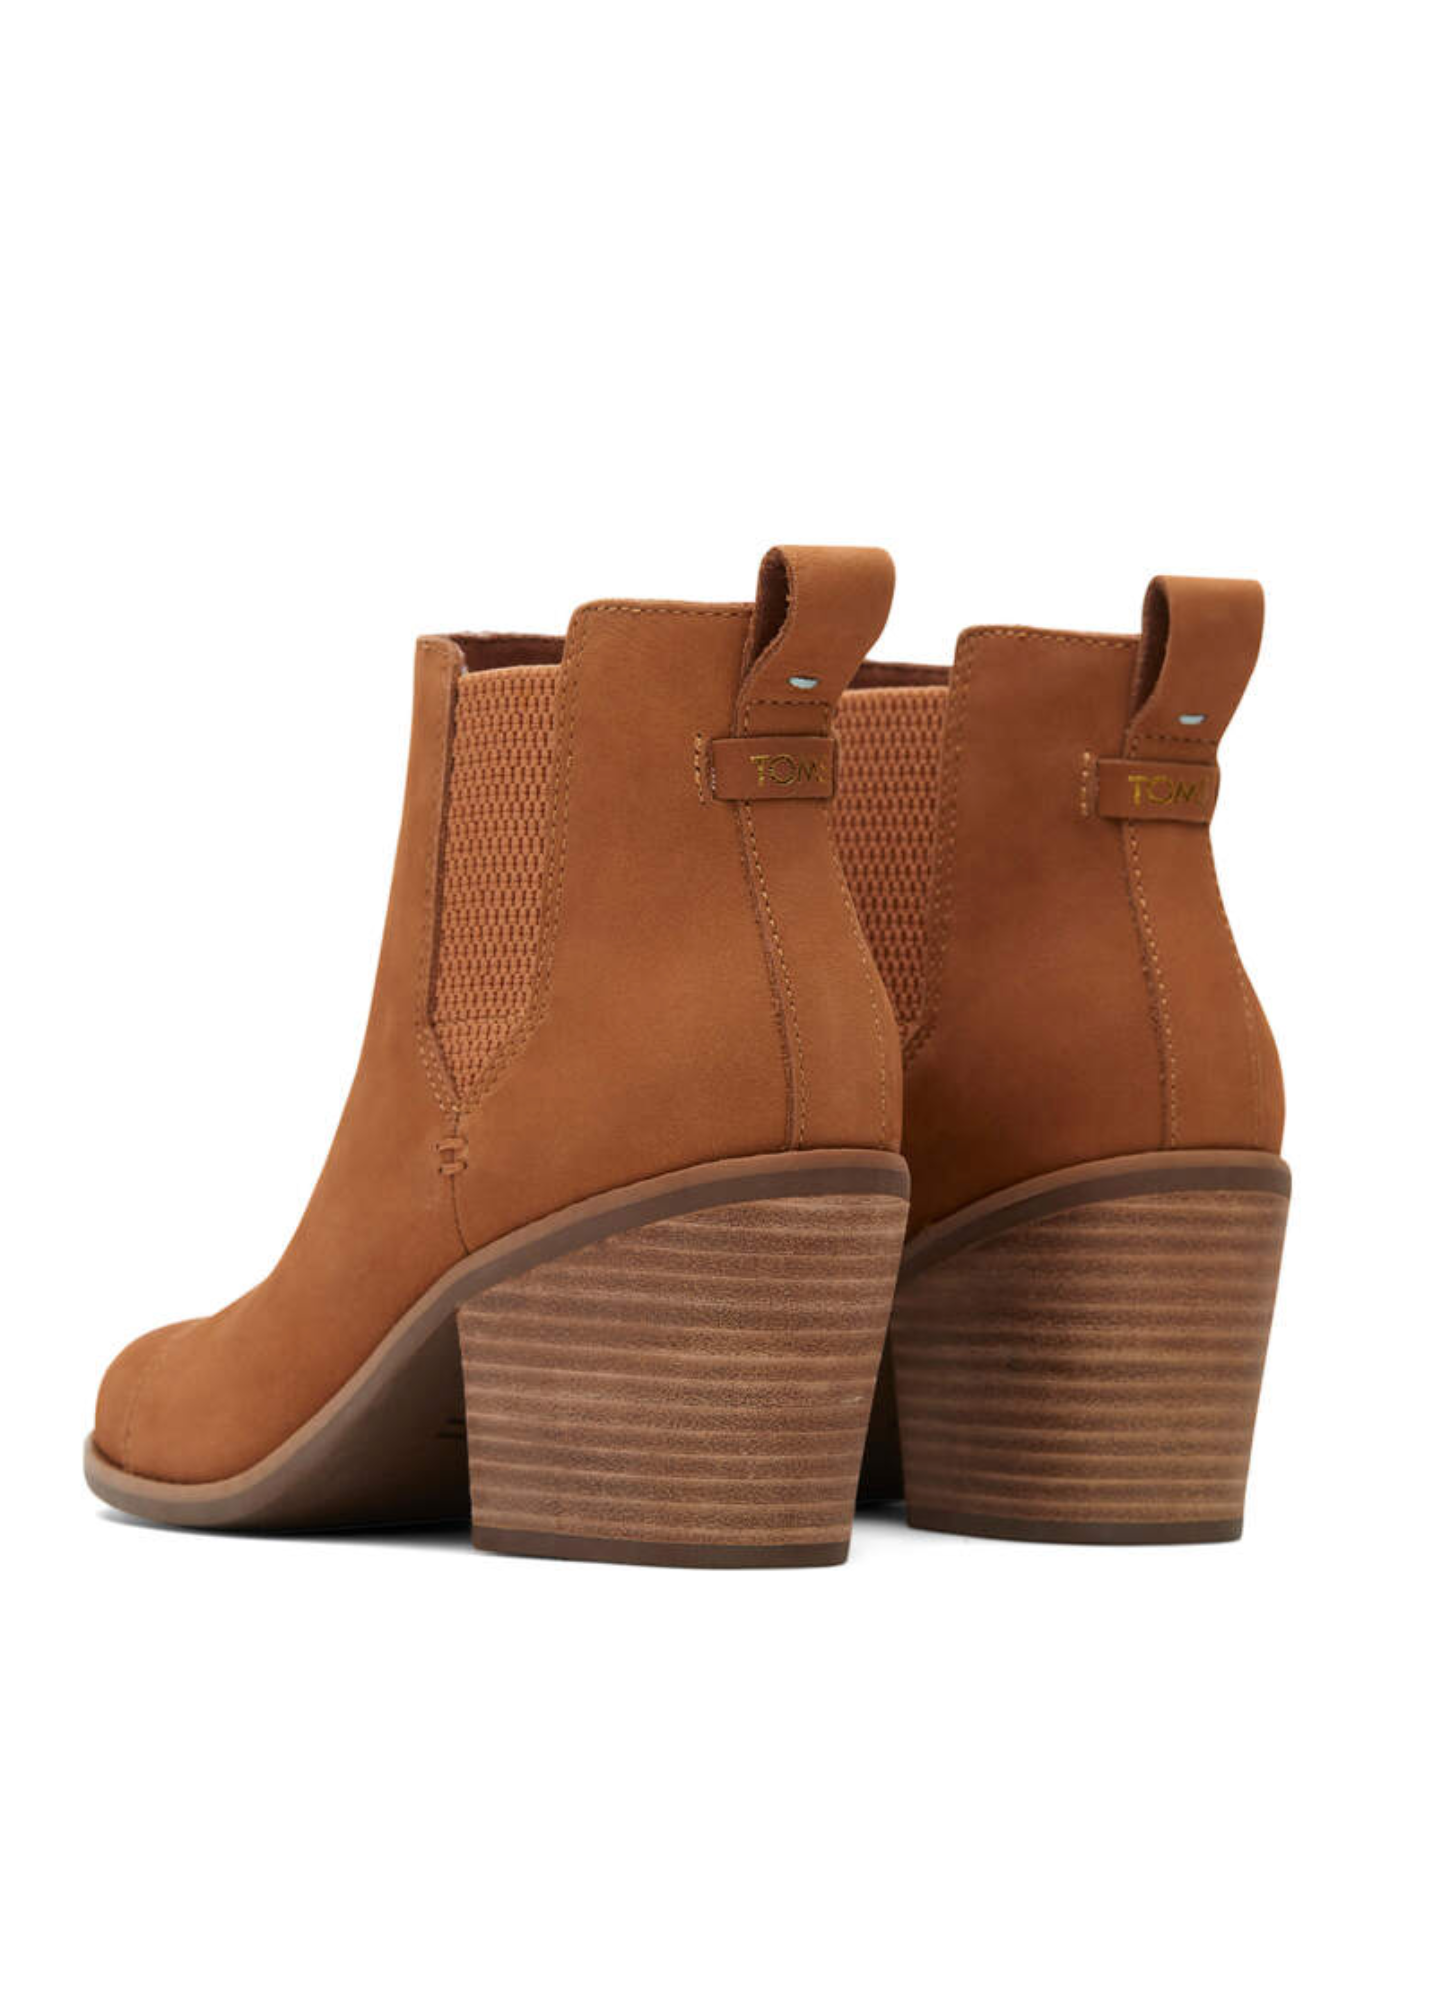 TOMS® Everly Bootie Shoes